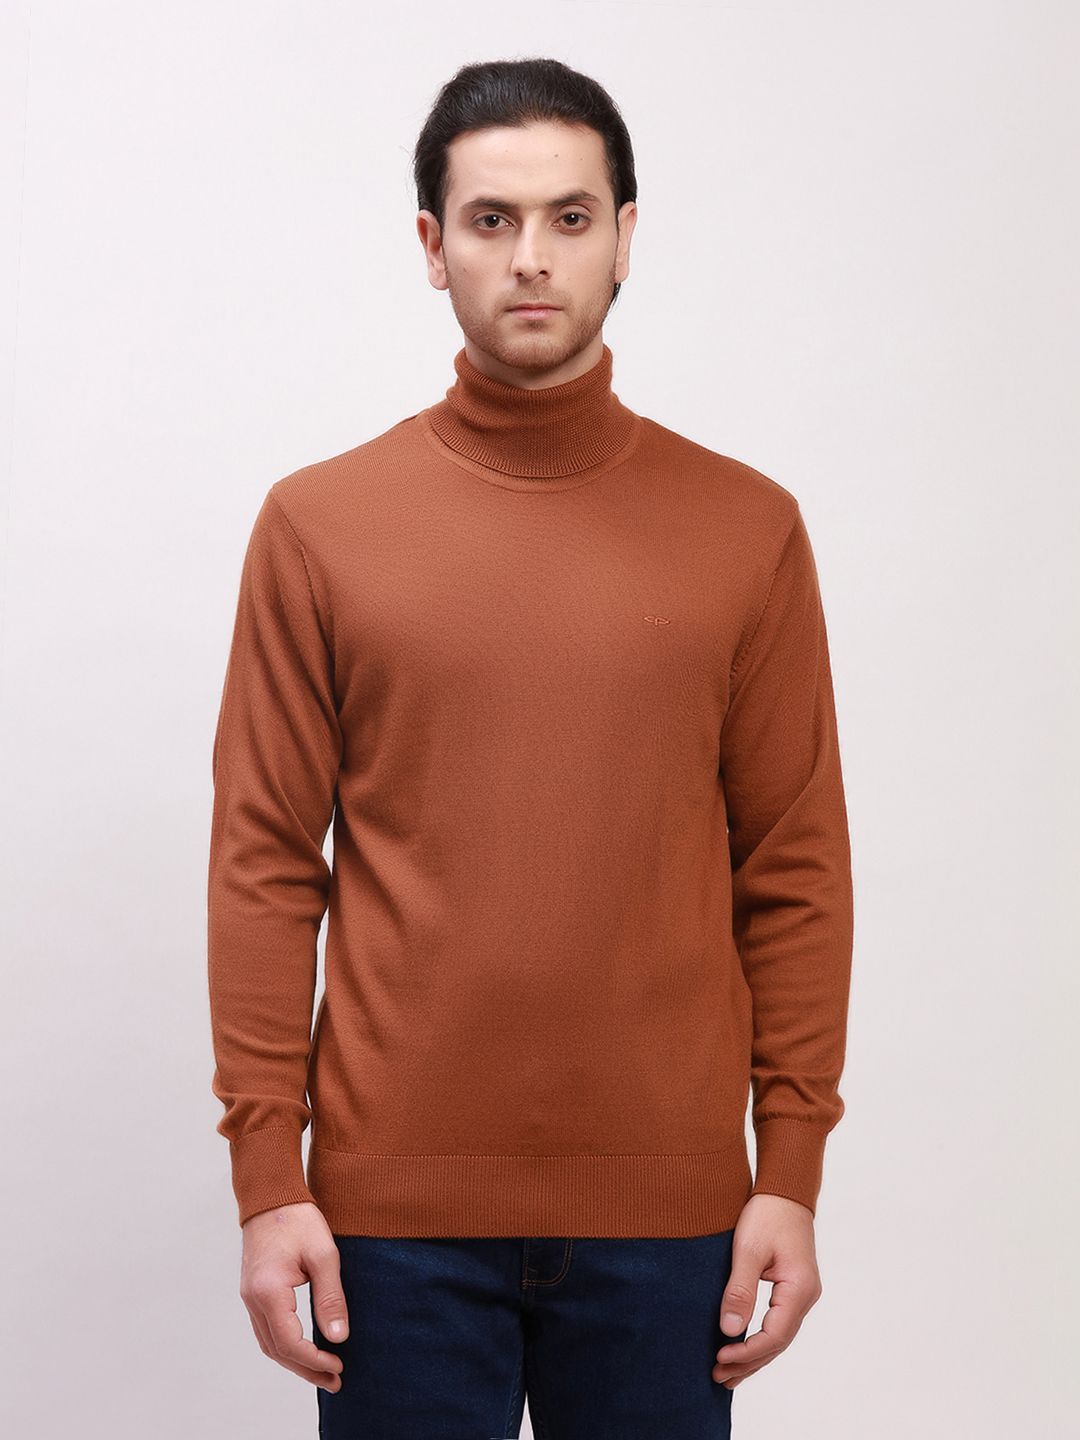     			Colorplus Acrylic High Neck Men's Full Sleeves Pullover Sweater - Coffee ( Pack of 1 )